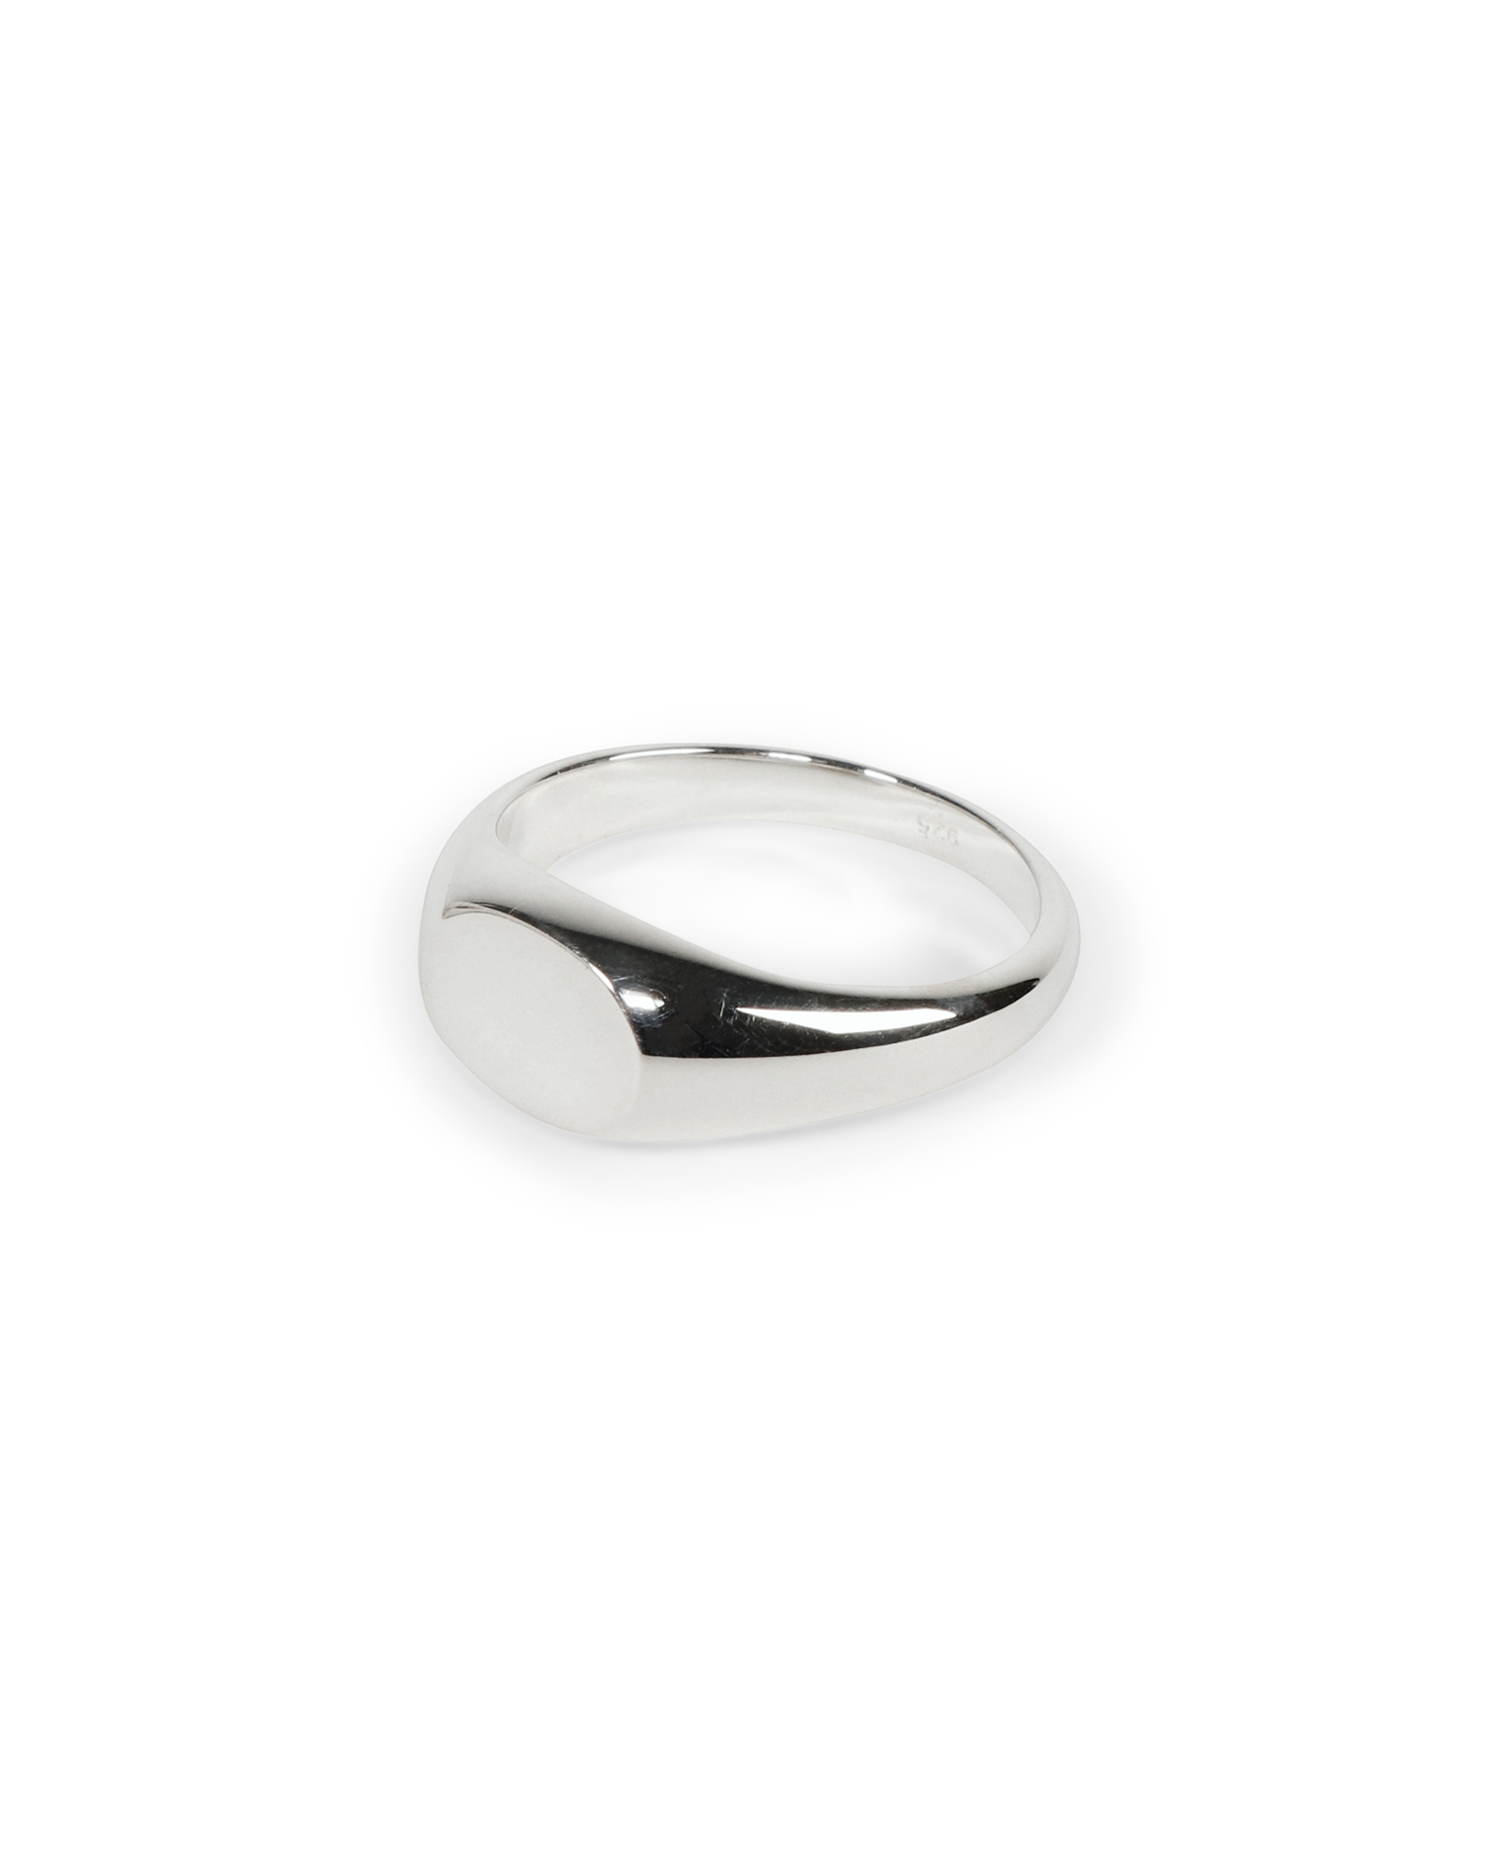 TYPE 001 Classic Signet Ring - 925 Sterling Silver